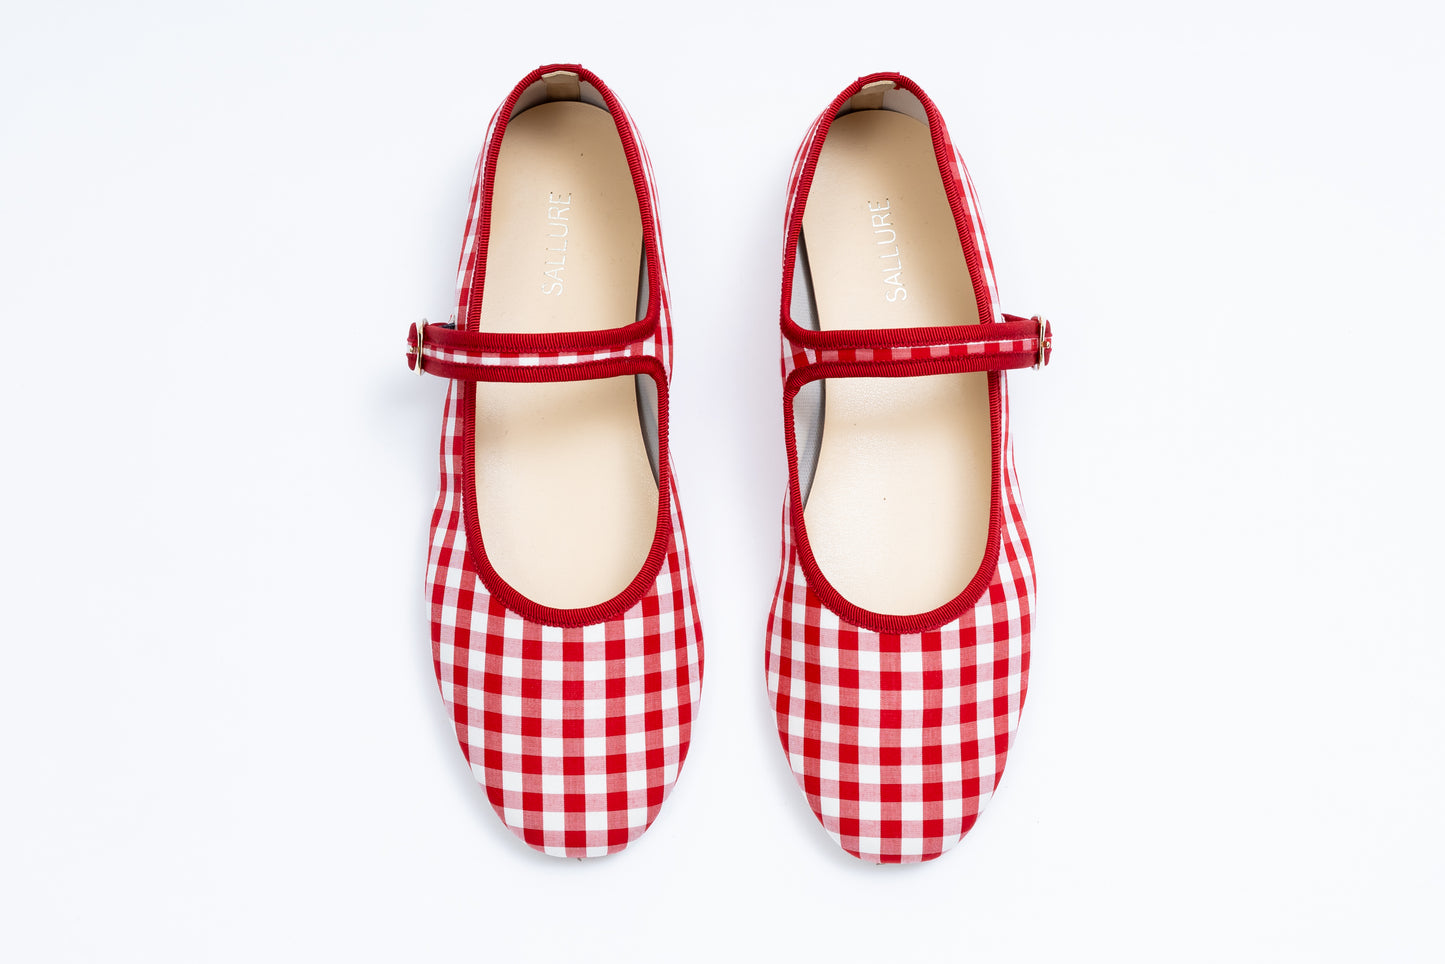 COLMAR　gingham check RED